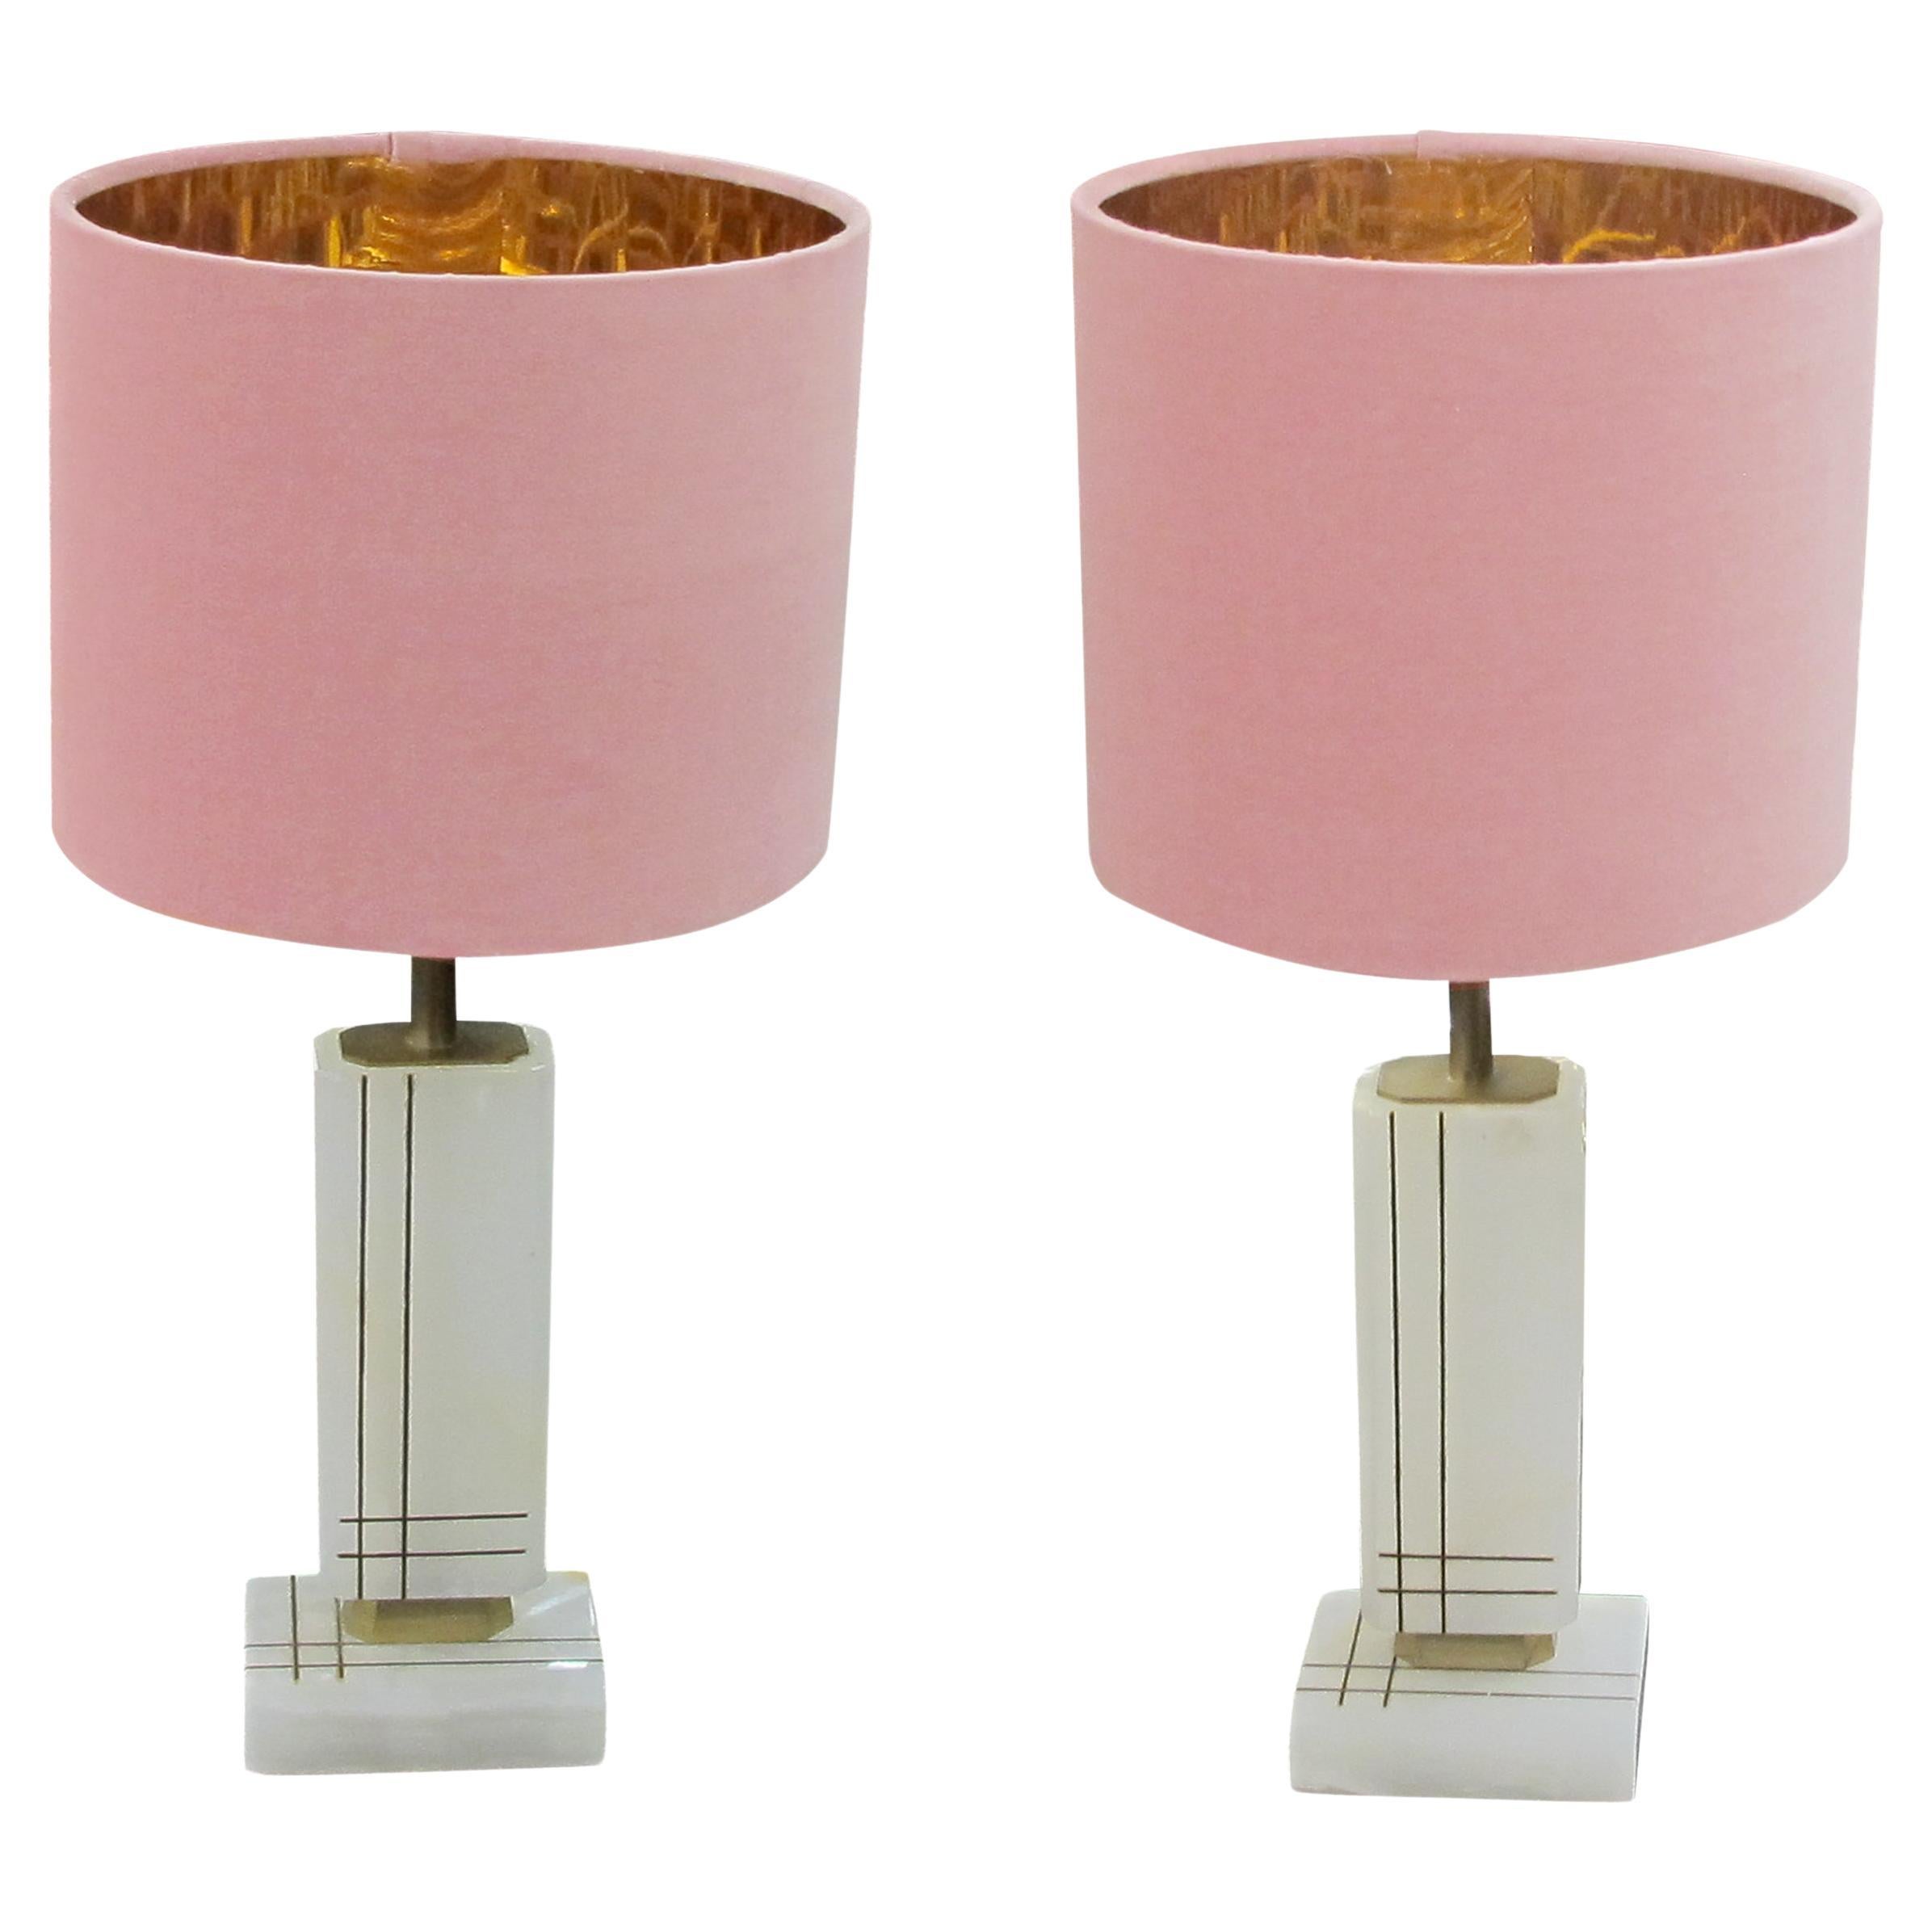 Pair of White Onyx Structural Table Lamps with Pink Shades, Italian 1960s For Sale